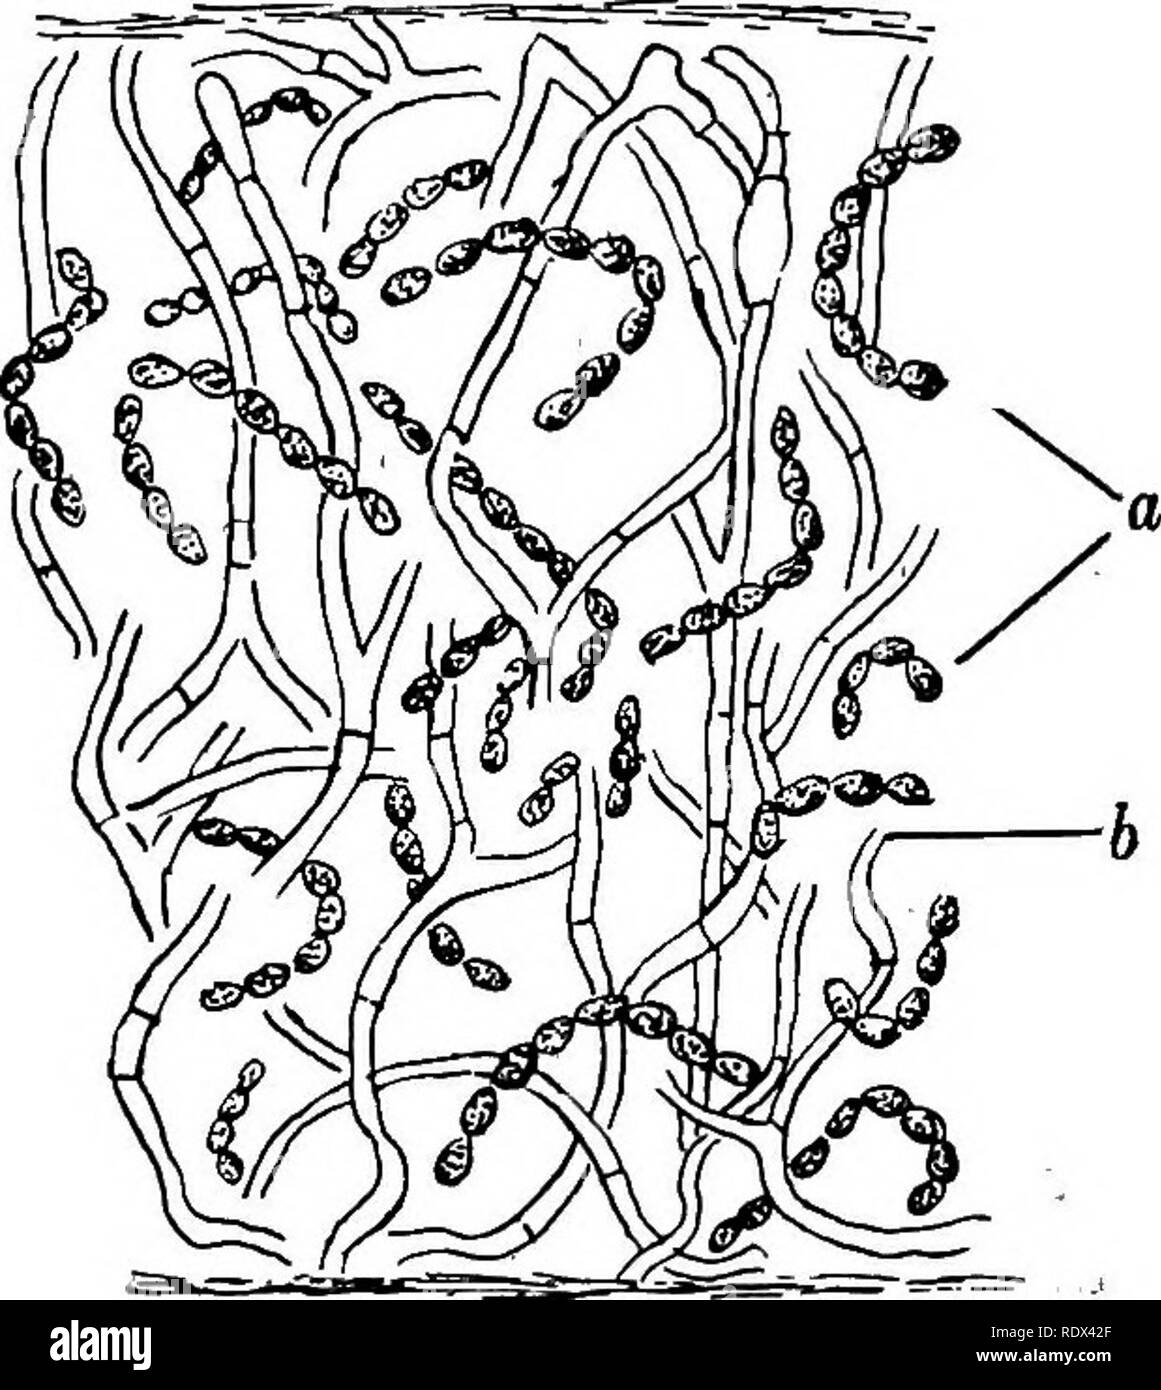 . Lichens. Lichens. Fig. 1. Physcia aipolia 'Hyh Vertical section of thallus. i/, cortex; ^, algal layer; c; medulla; d, lower cortex. X 100 (partly diagrammatic). Fig. 3. Collema nigrescens Aci. Vertical section of thallus. a, chains of the alga Nostoc; b-, fungal filaments, x 600. - remain distinct. The green zone can be easily demonstrated in any of the larger lichens by scaling off the outer surface cells, or by making a vertical section through the thallus. The colourless cells penetrate to some extent among the green cells; they also form the whole of the cortical and medullary tissues. Stock Photo